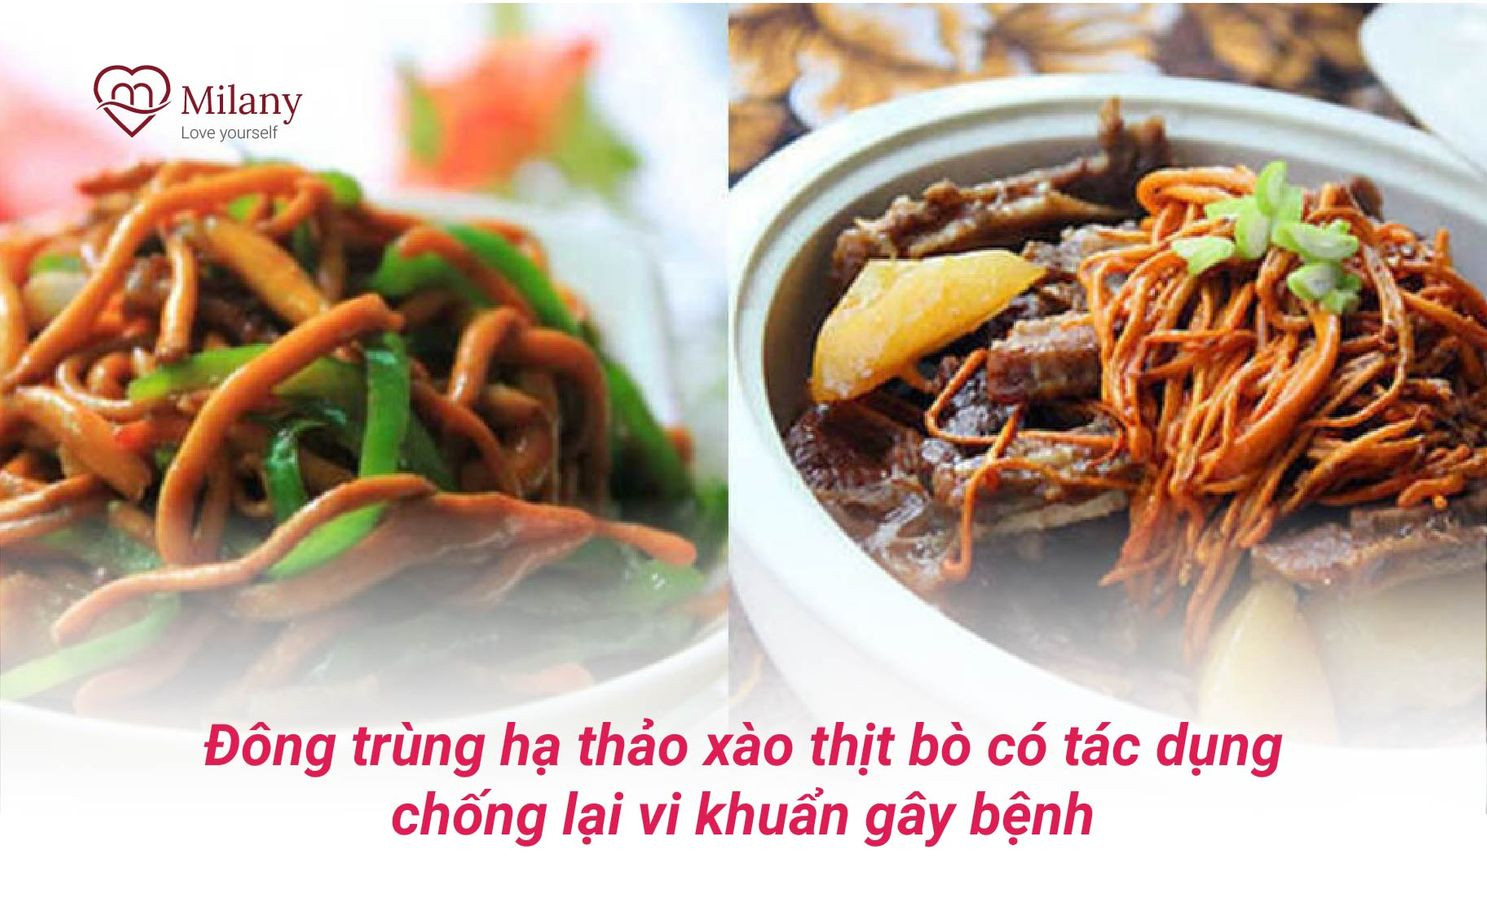 che bien dong trung ha thao voi thit bo